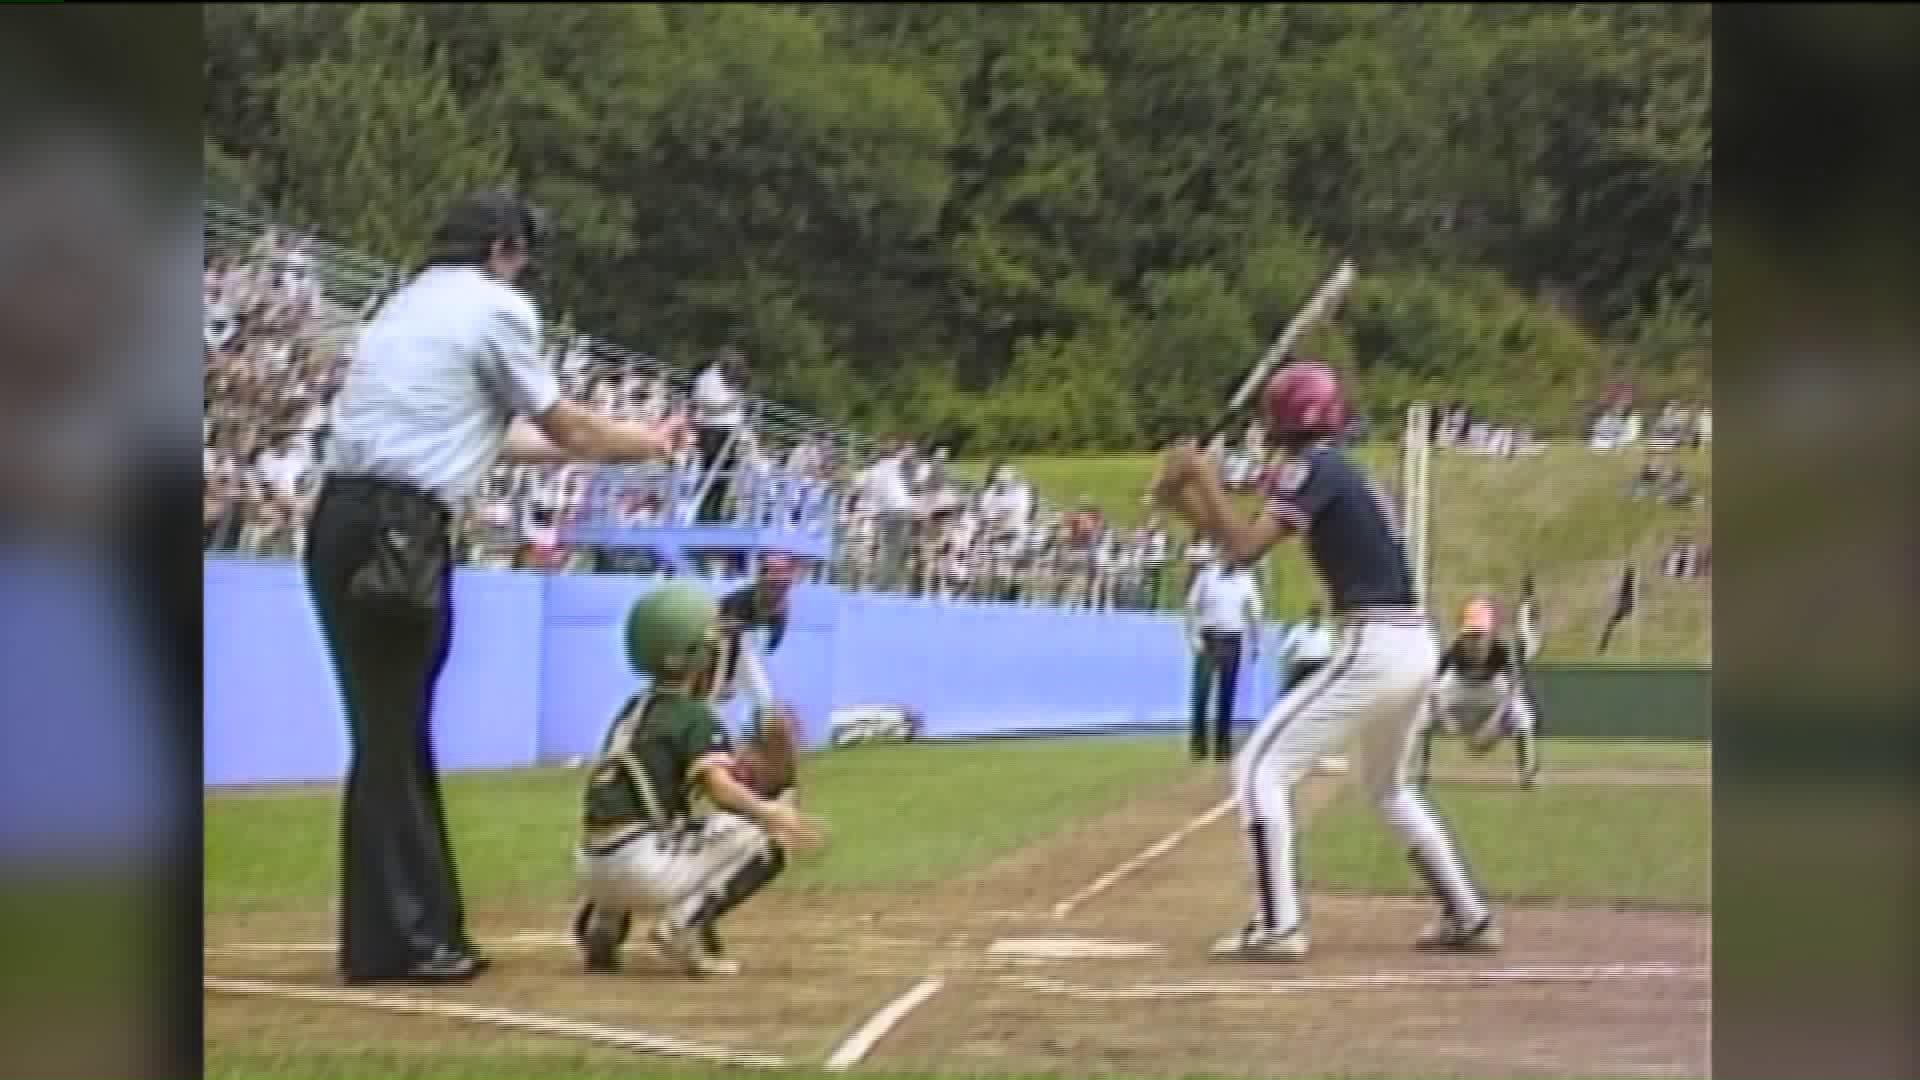 Little League Sights and Sounds in 1985